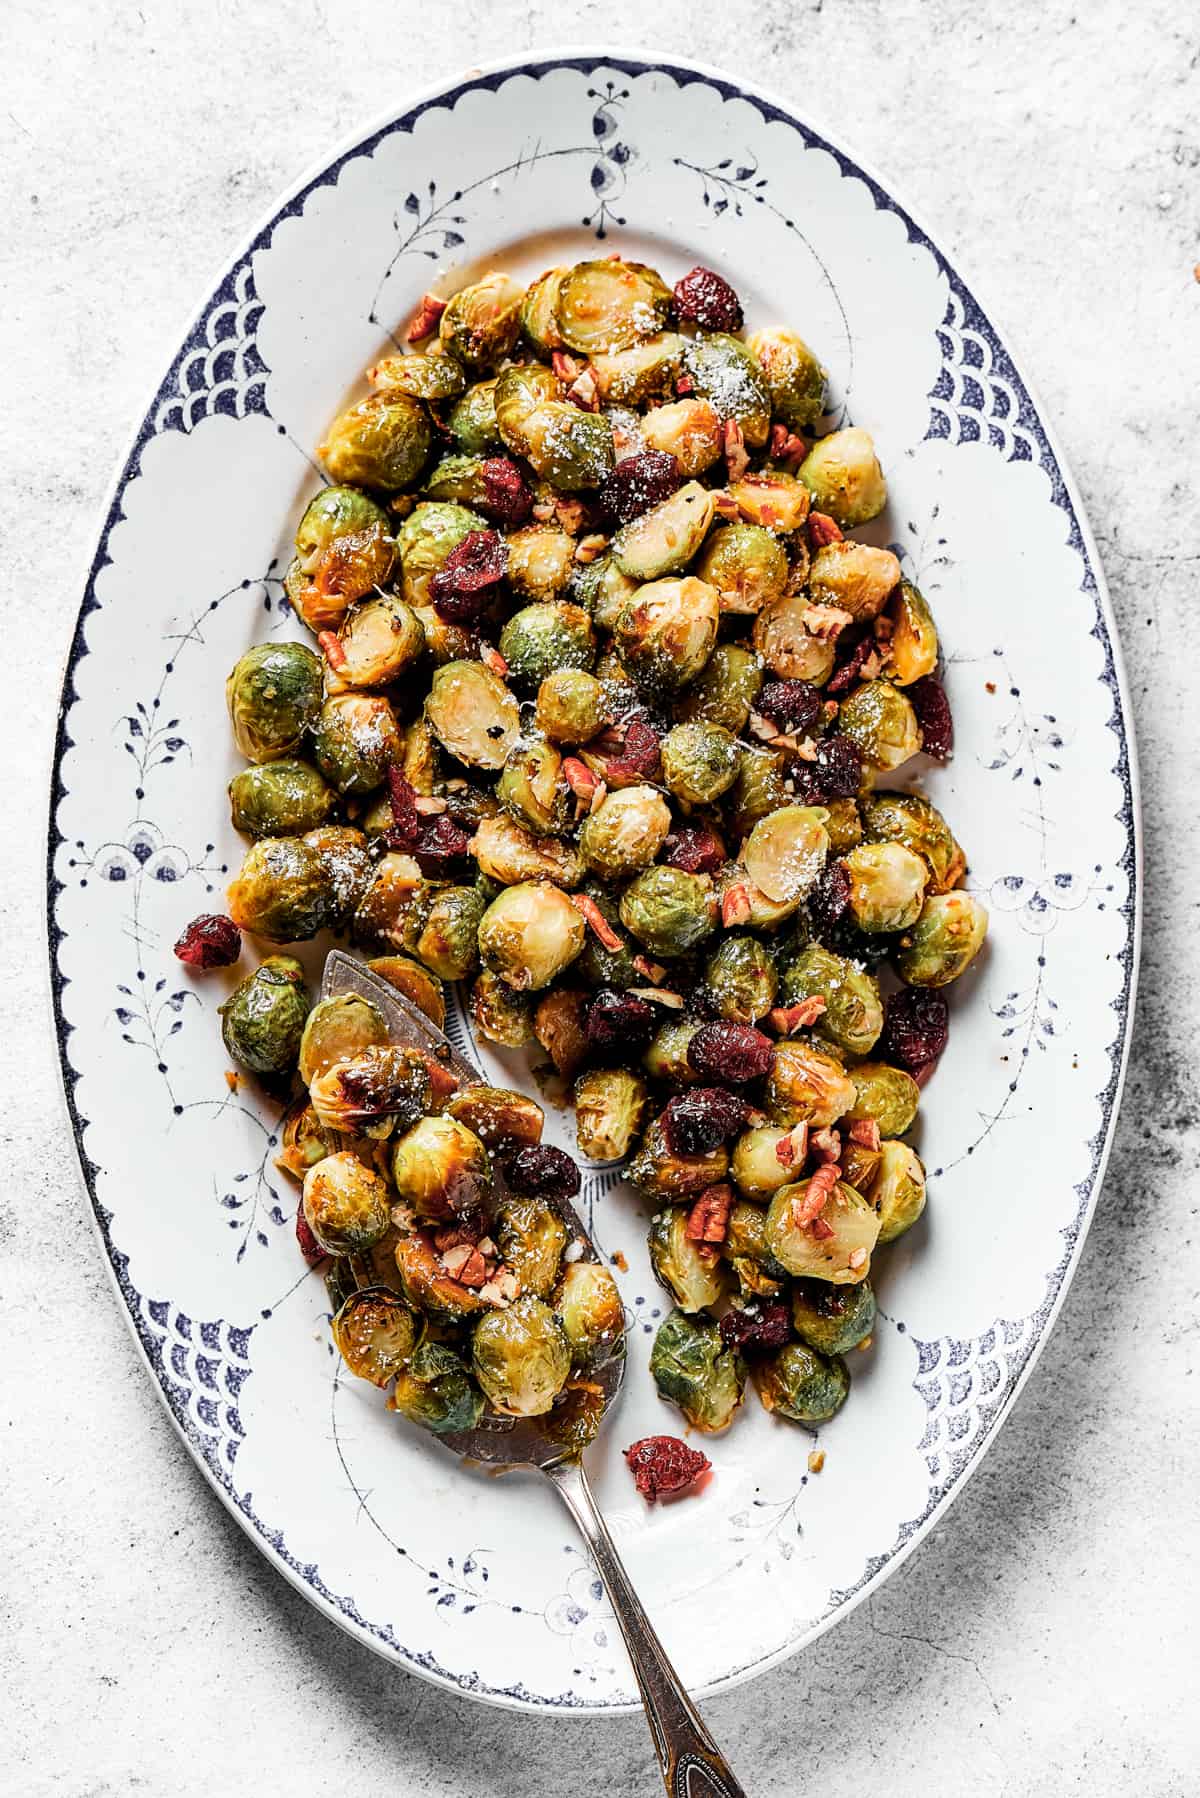 Oval platter with roasted, glazed brussel sprouts.